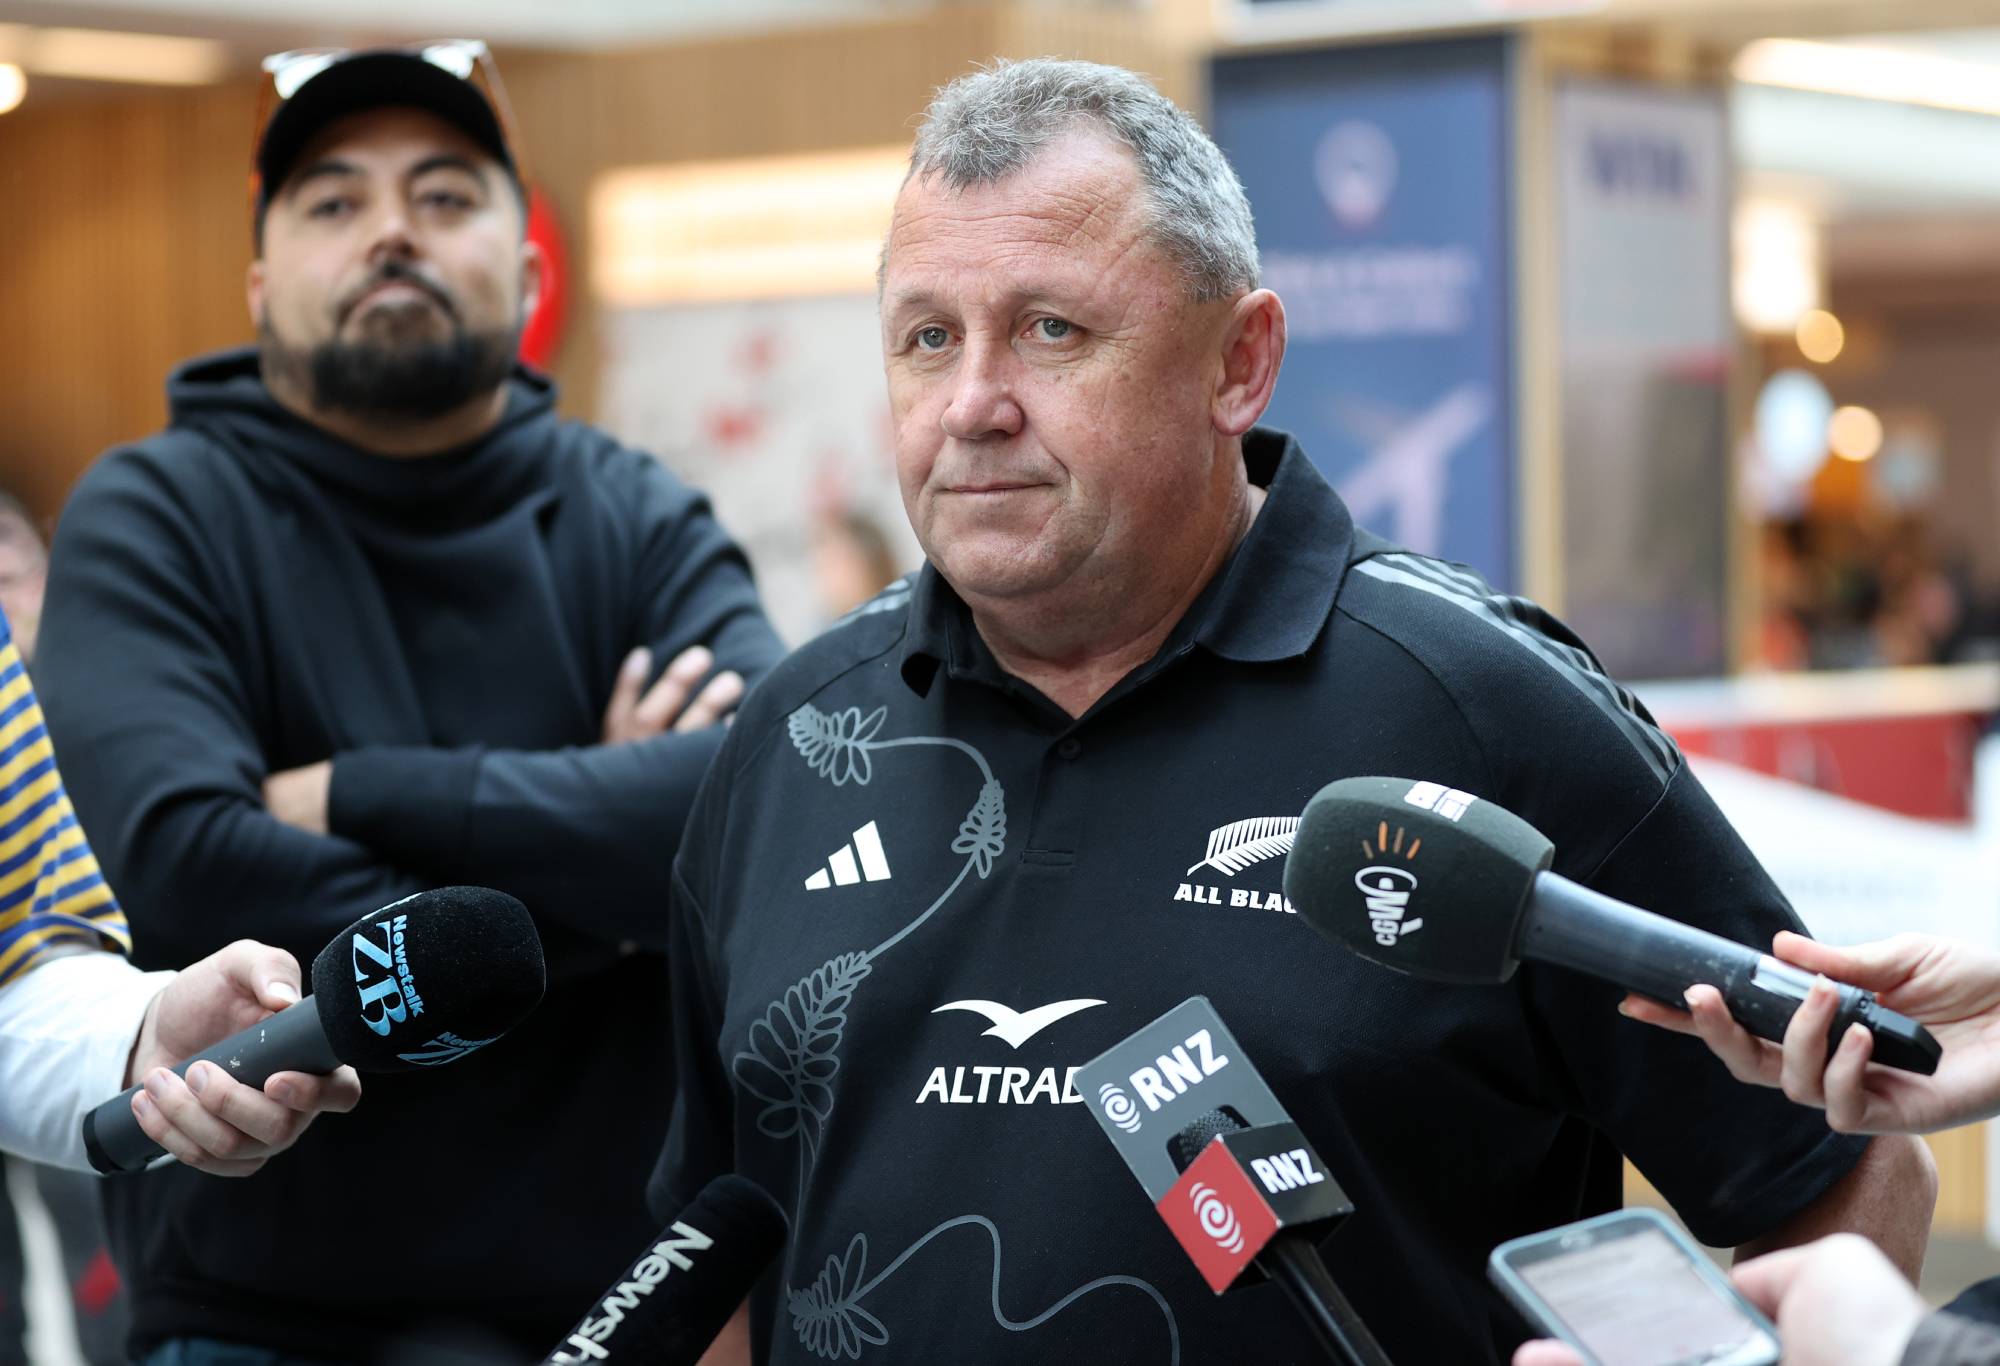 All Blacks coach Ian Foster speaks to media as the All Blacks depart for the Rugby World Cup at Auckland International Airport on August 18, 2023 in Auckland, New Zealand. (Photo by Fiona Goodall/Getty Images)